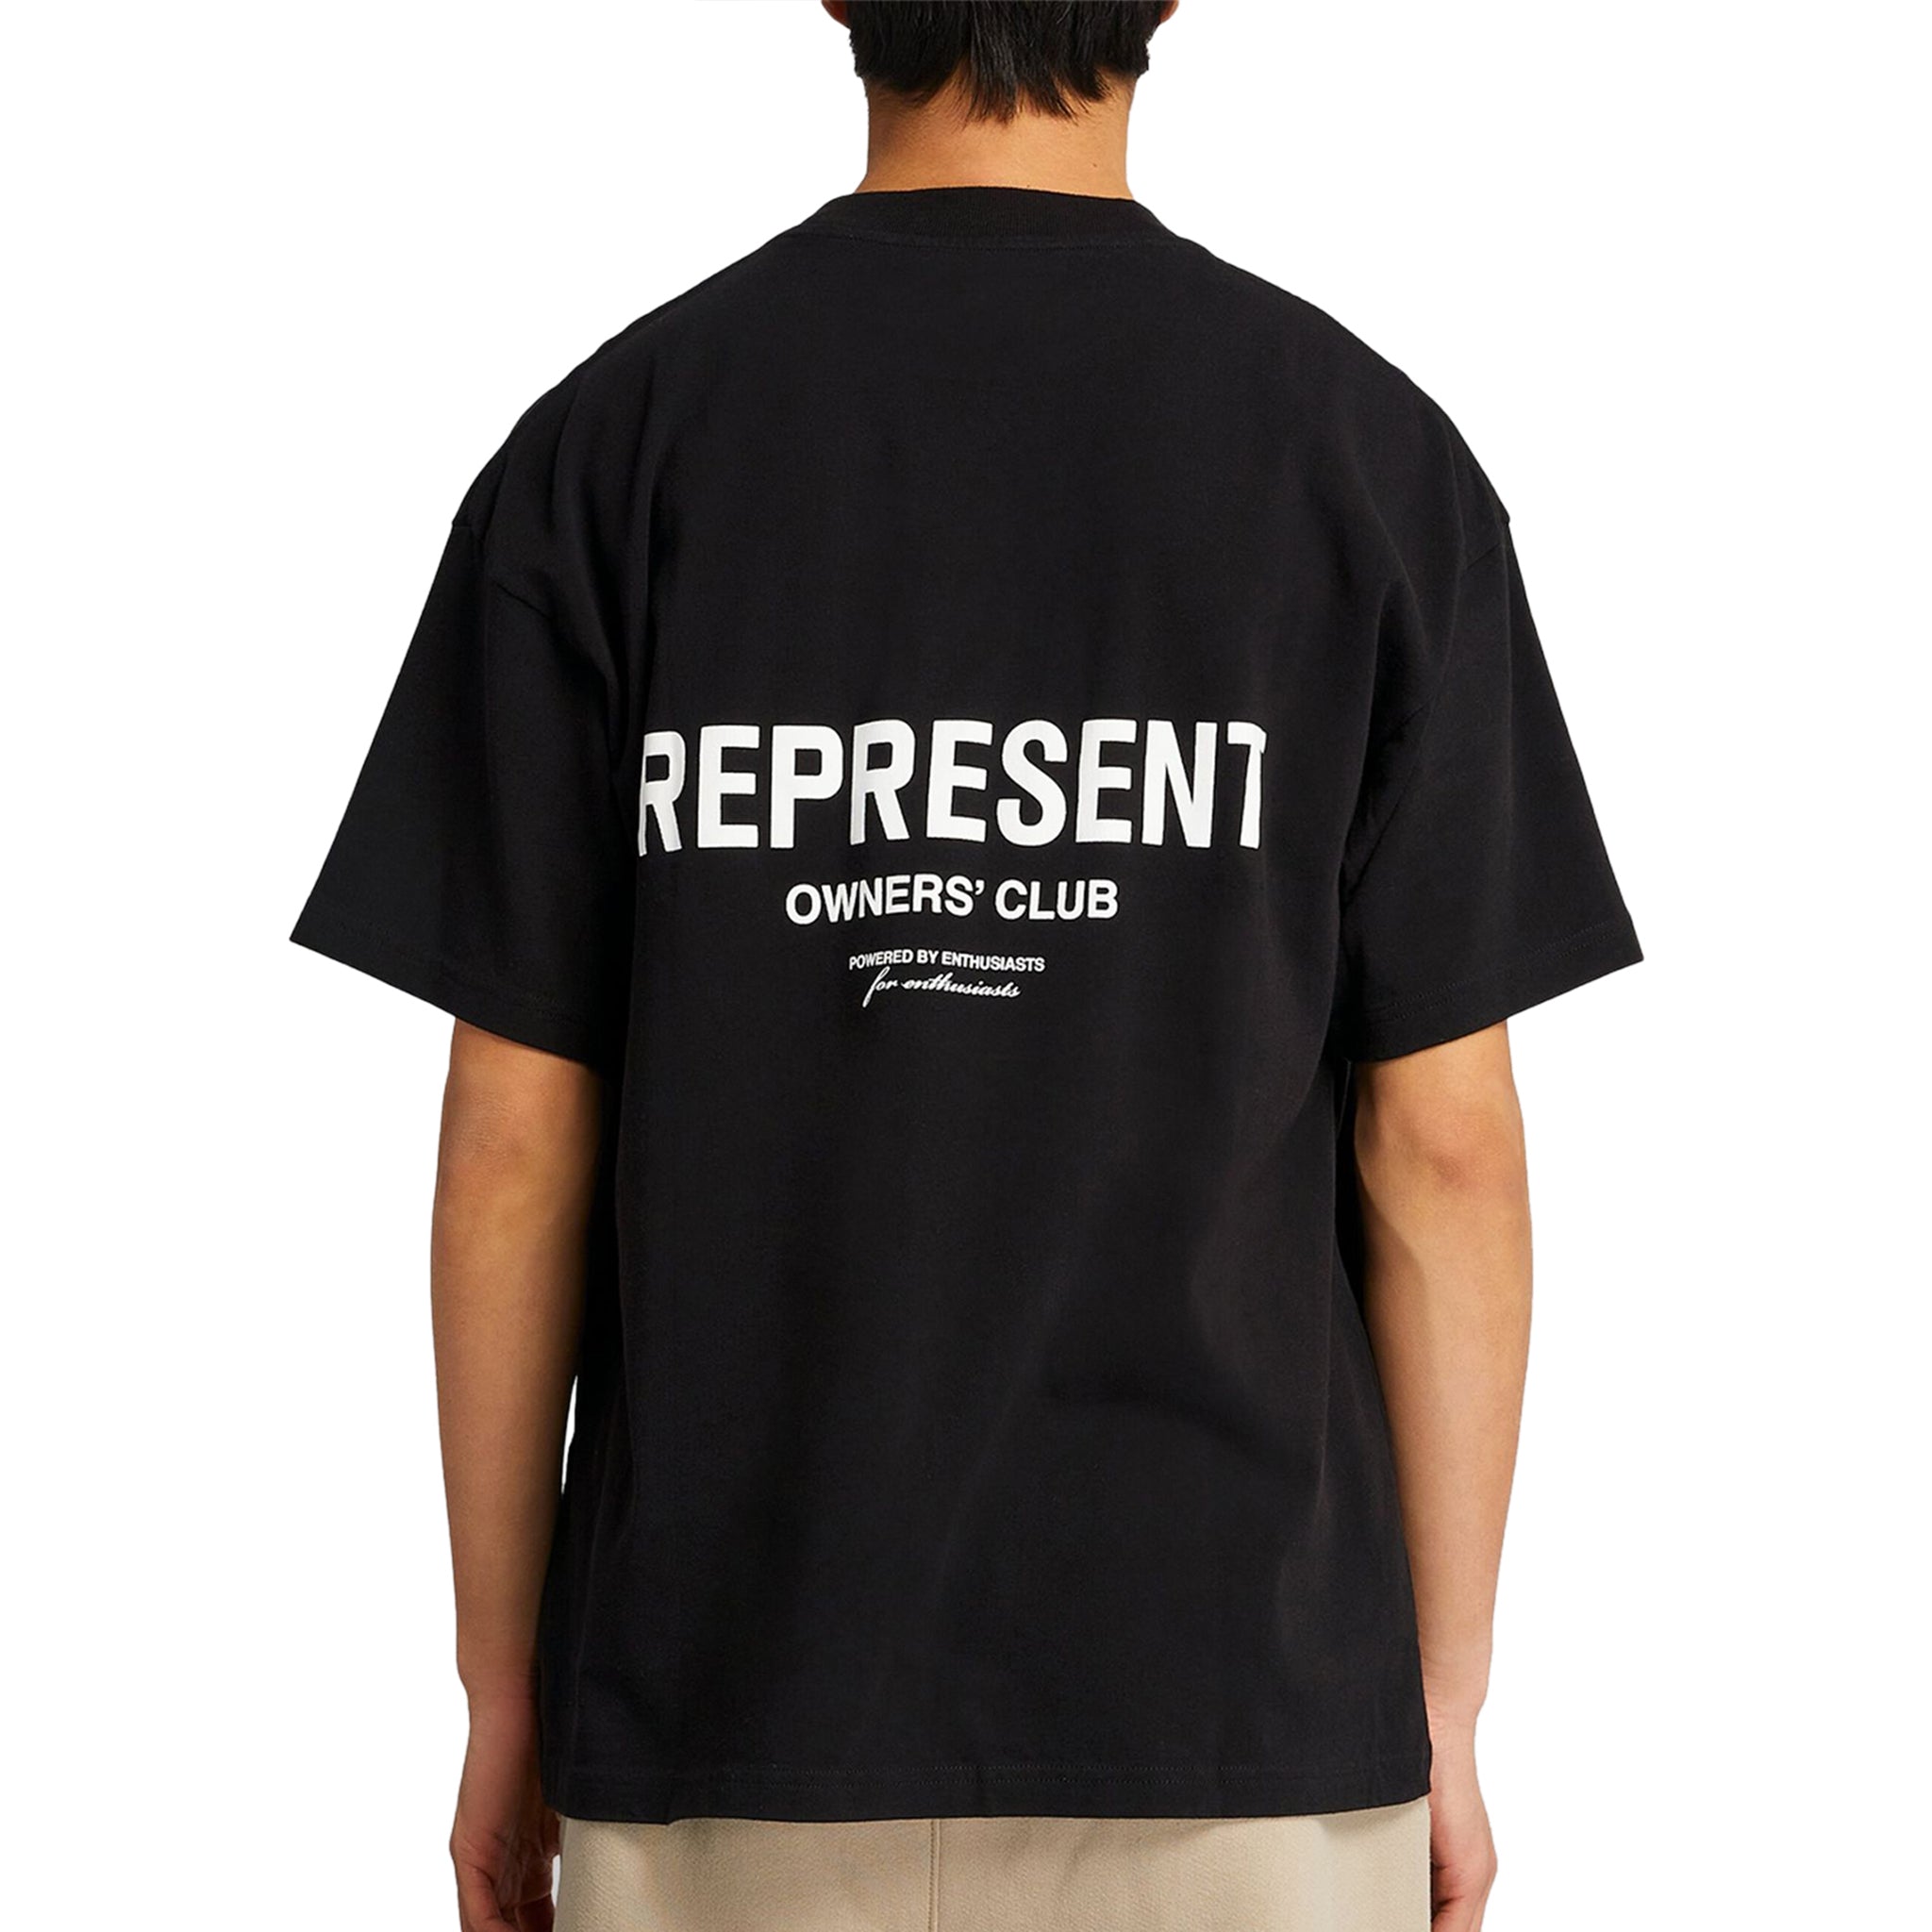 Model back view of Represent Owners Club Black T Shirt M05149-01